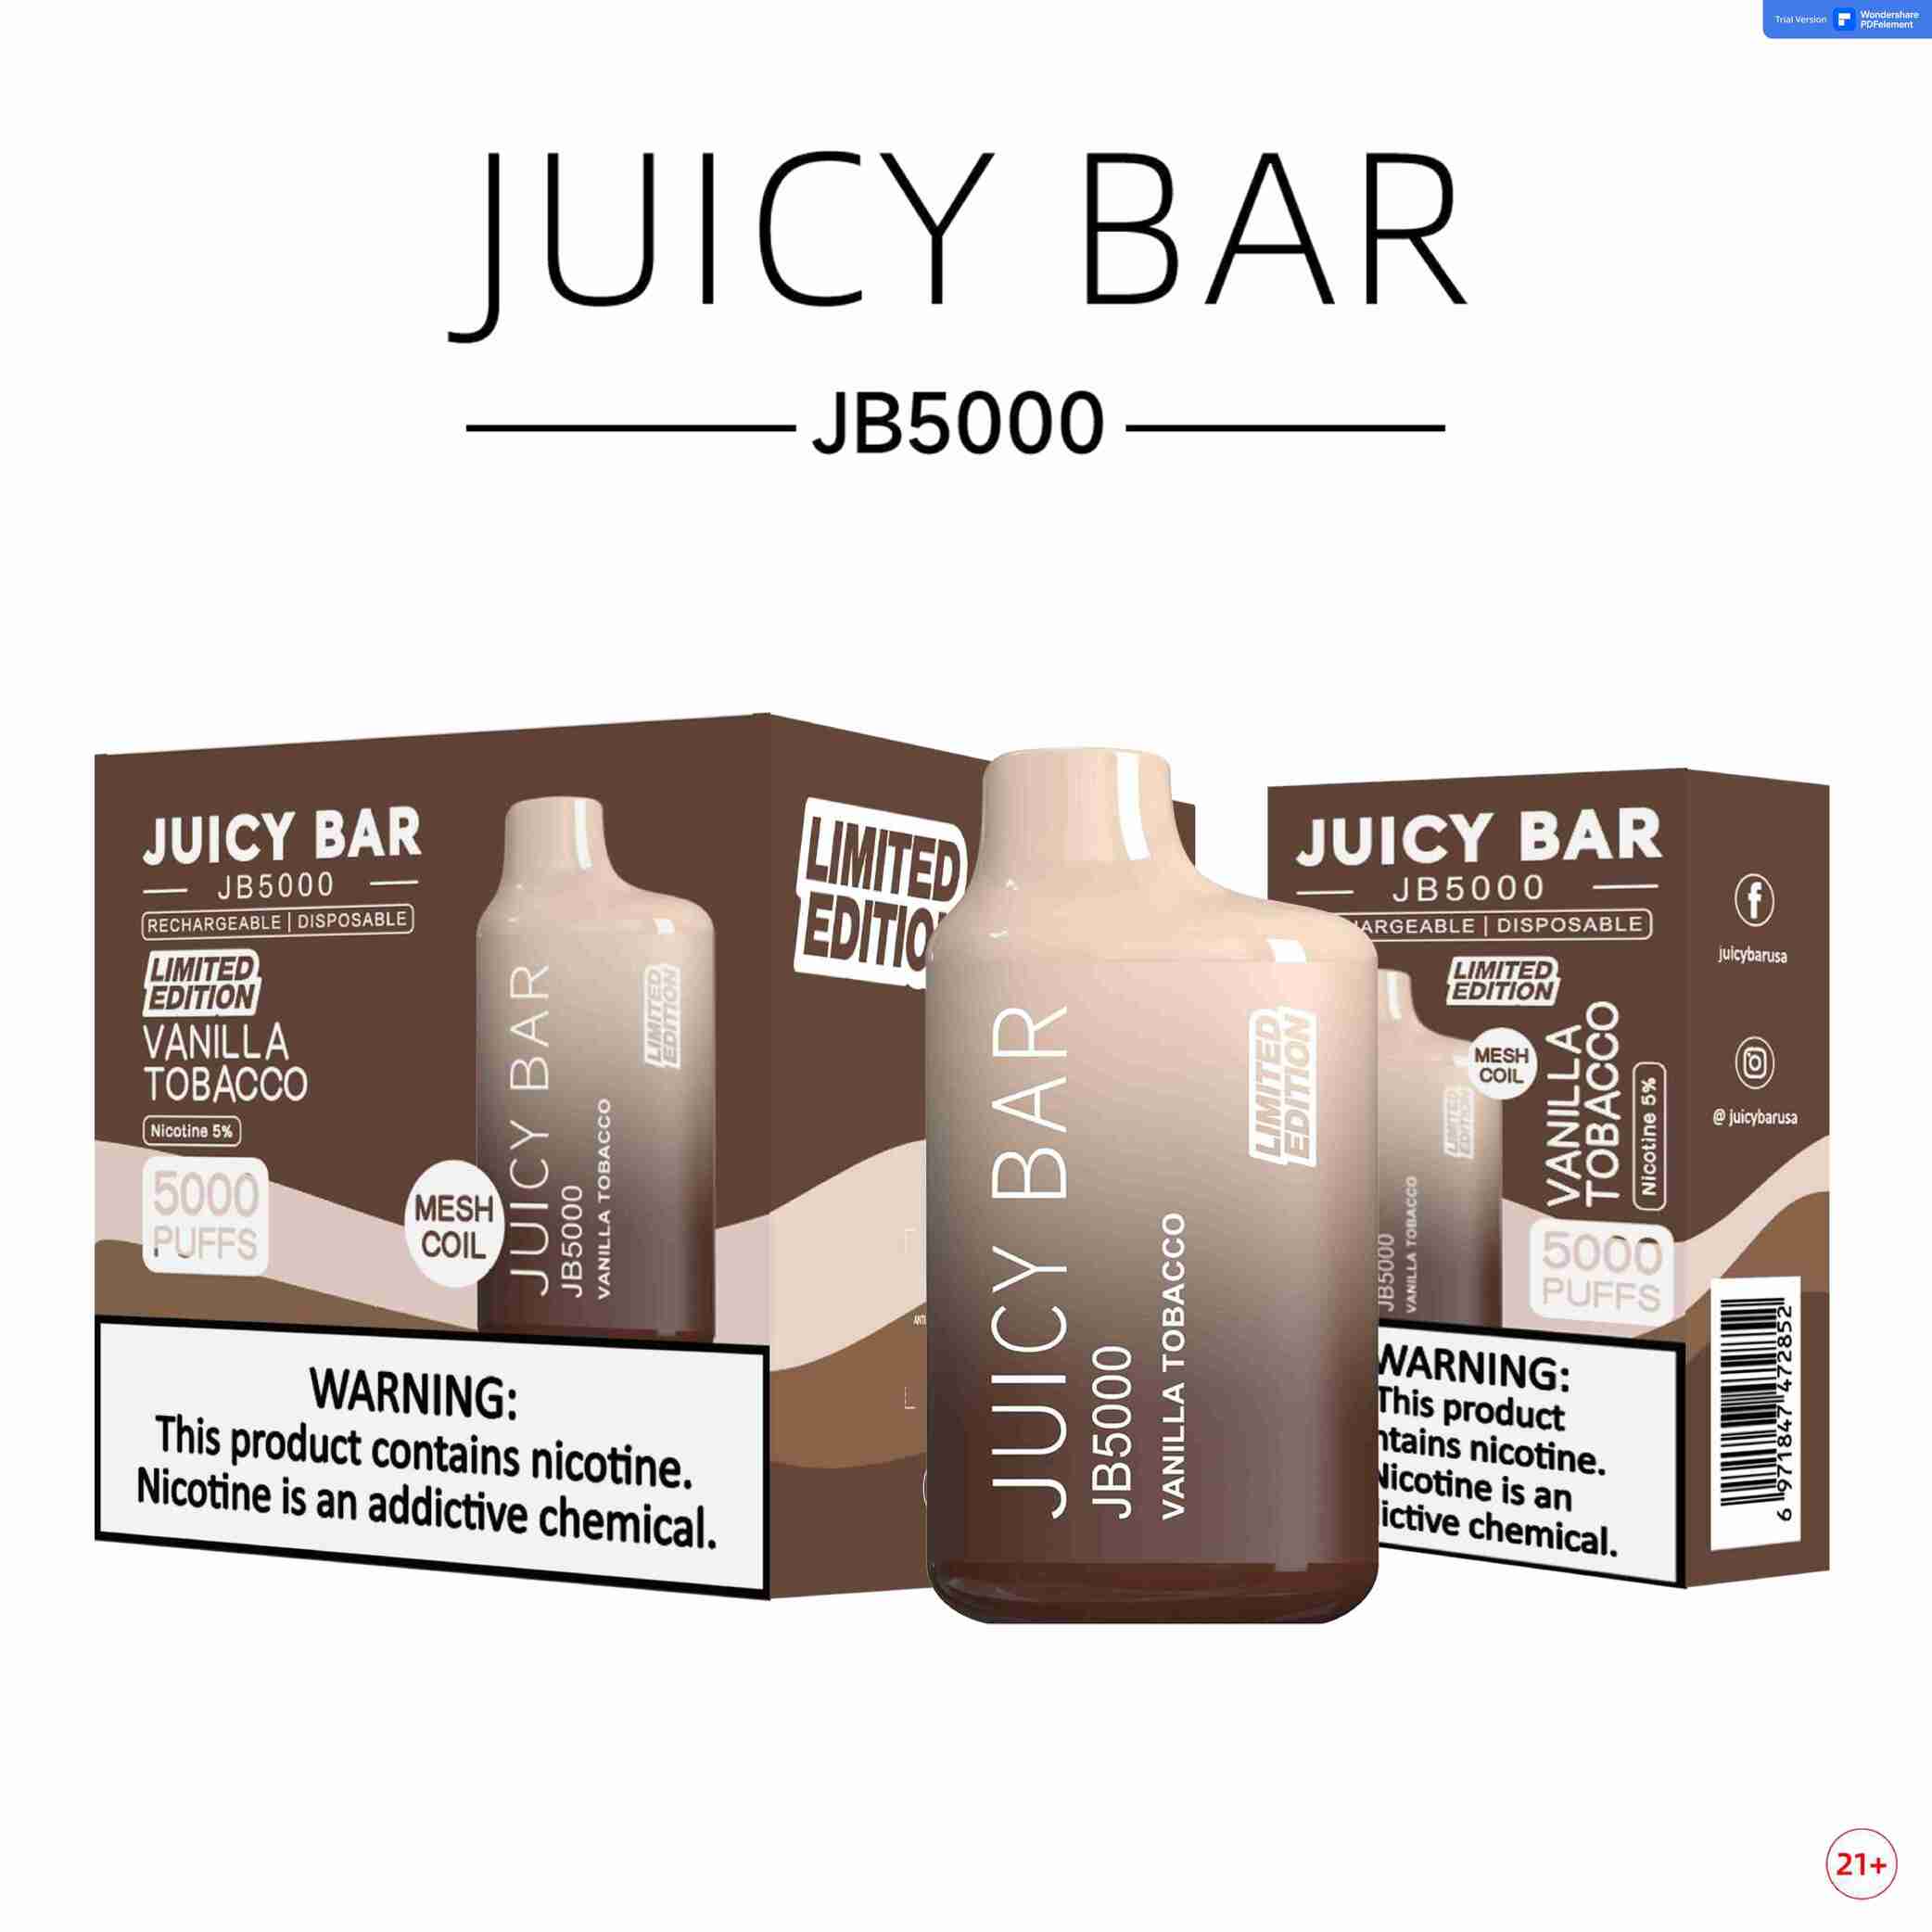 JUICY BAR LIMITED EDITION 5% DISPOSABLE DEVICE 5000 PUFFS